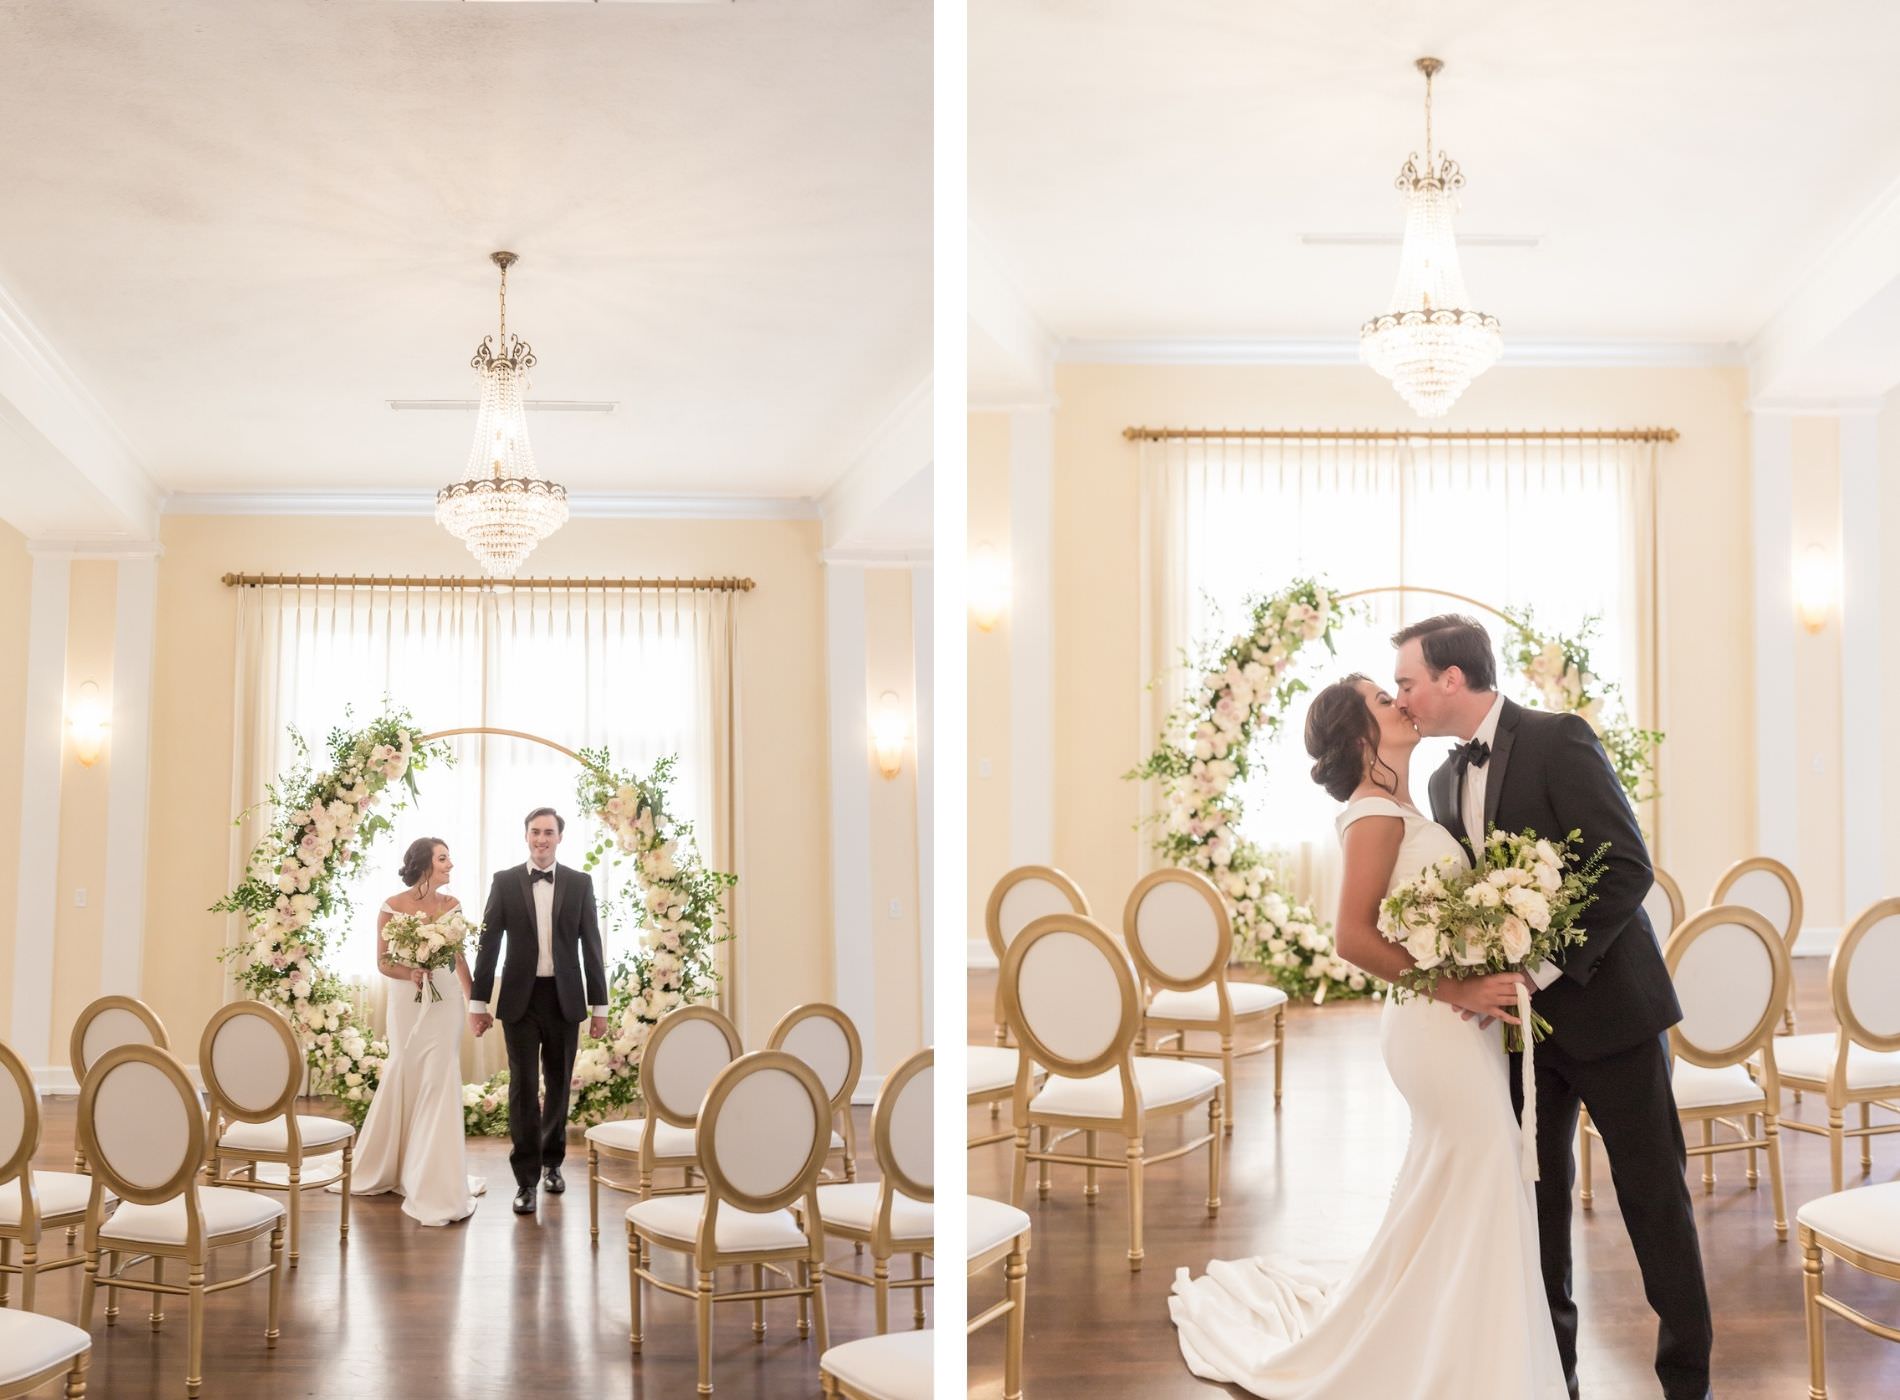 Classic and timeless bride and groom holding hands and kissing in front of lush white, blush pink roses floral arrangement on circular arch, eucalyptus and greenery | Tampa Bay wedding planner and designer Elegant Affairs by Design | Kate Ryan Event Rentals | Adore Bridal Hair and Makeup